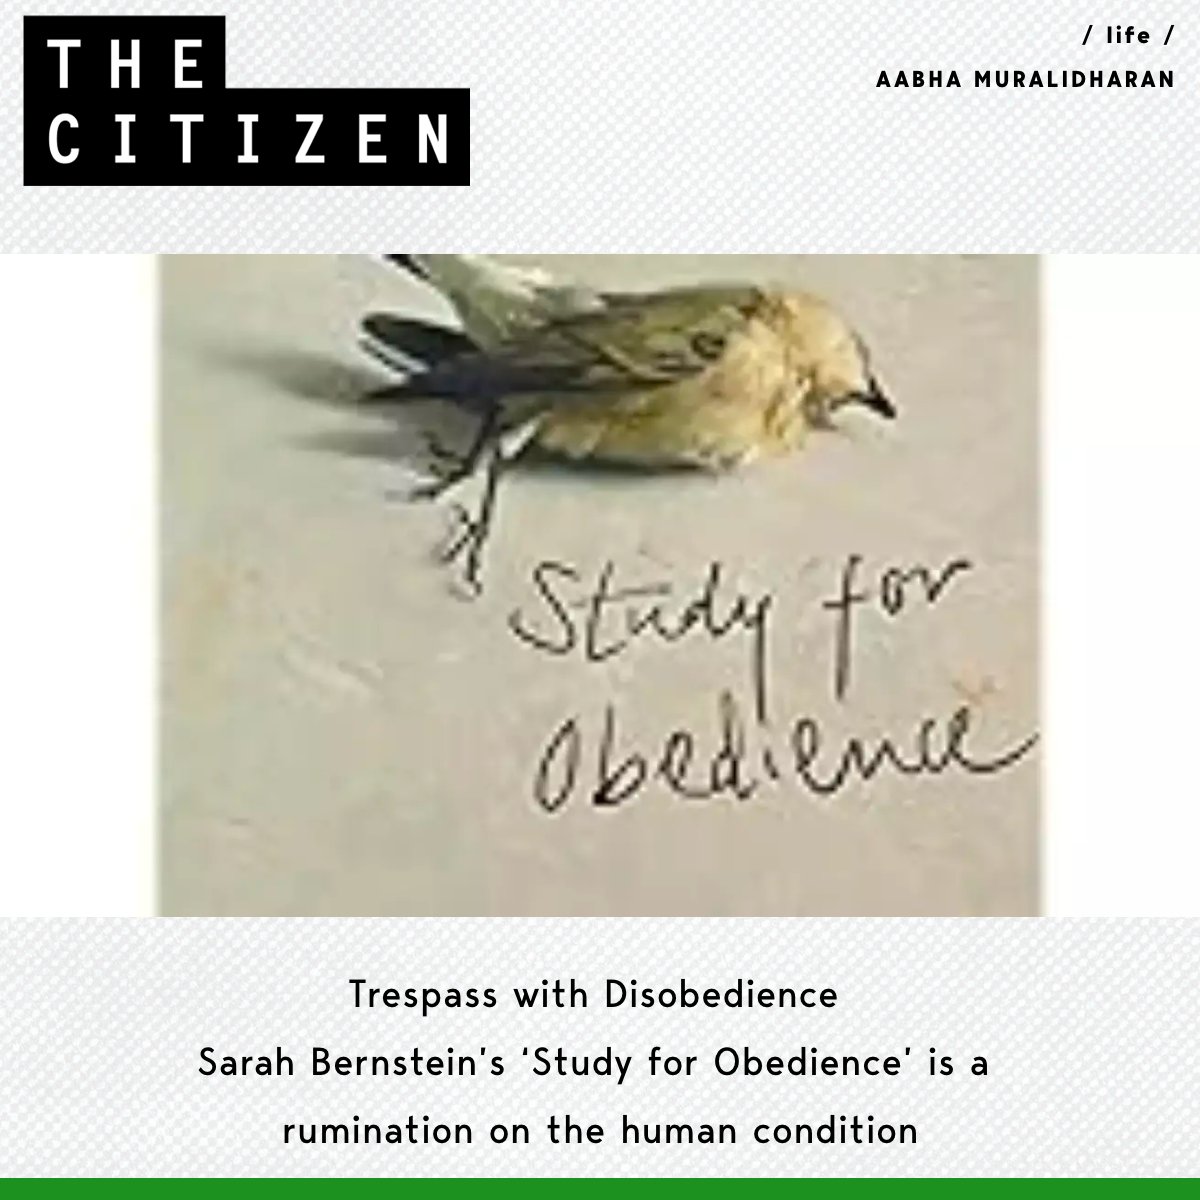 ‘Study for Obedience’ opens with a disturbing and compelling statement.

AABHA MURALIDHARAN reviews the book by Sarah Bernstein:

Read the full report here:  bit.ly/3so3e7P

#BookReview #StudyforObedience